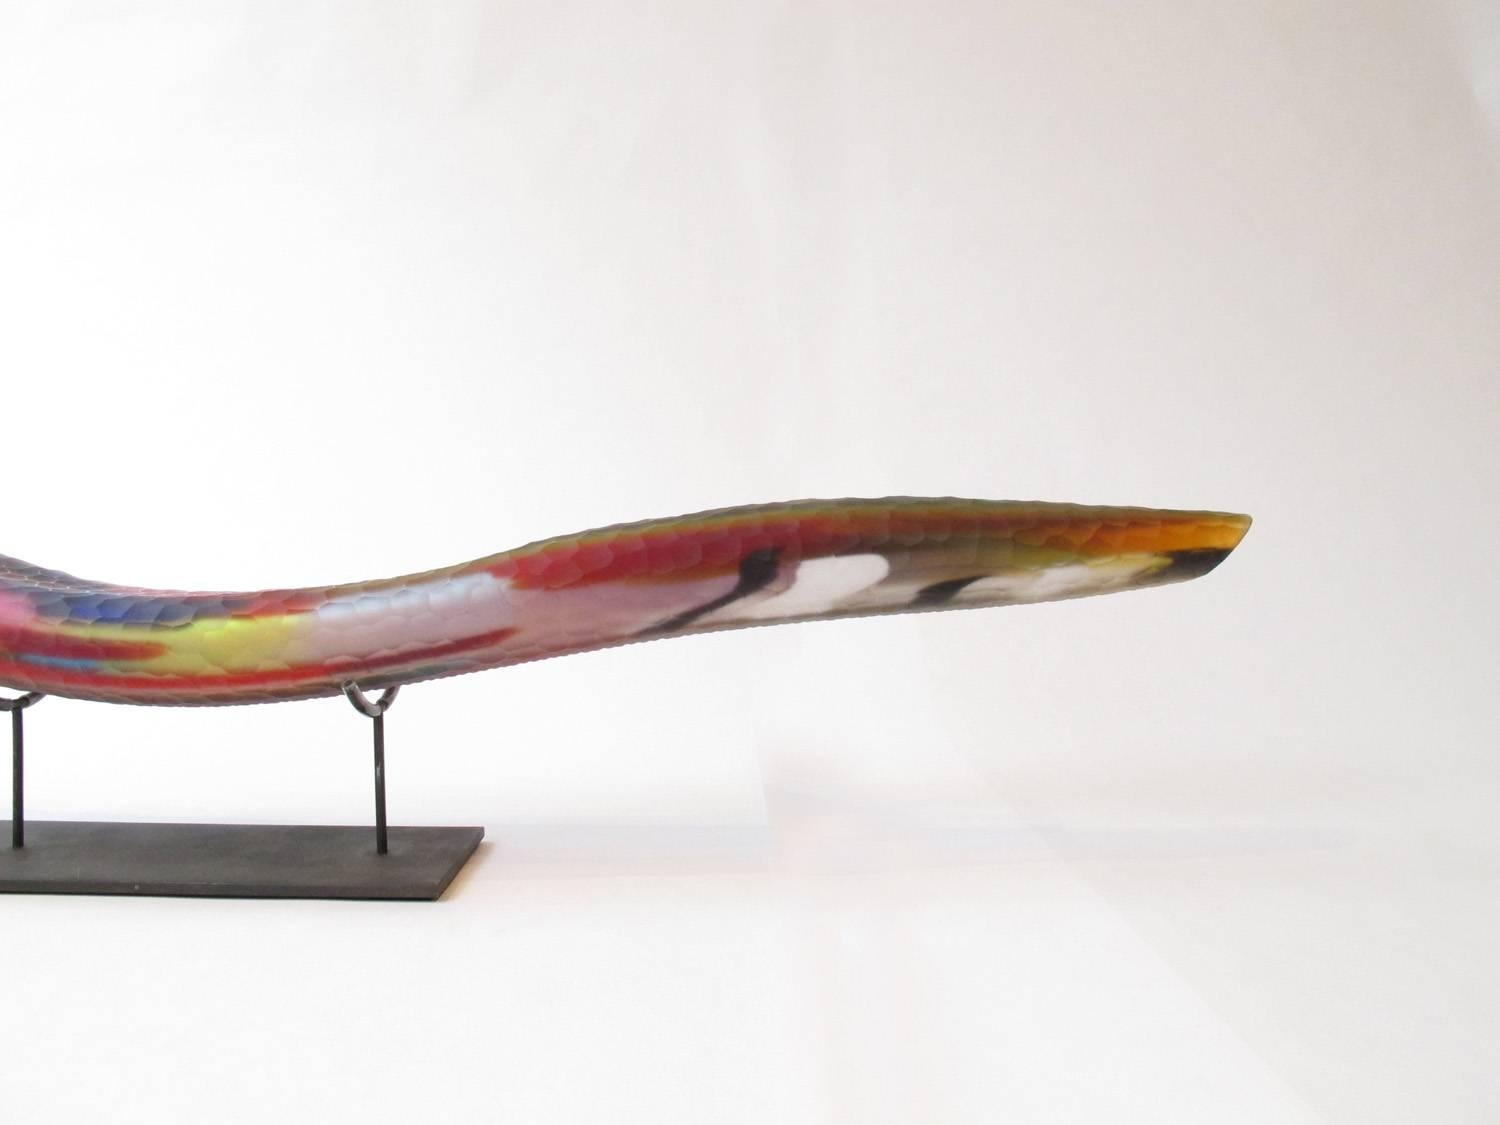 Venice I is a glass sculpture by Alessandro Casson.

Alessandro Casson thinks up and designs his pieces, then to make them, he works with various master glassblowers and craftsmen (smiths, carpenters, glass cold workers).

His vision is to advance